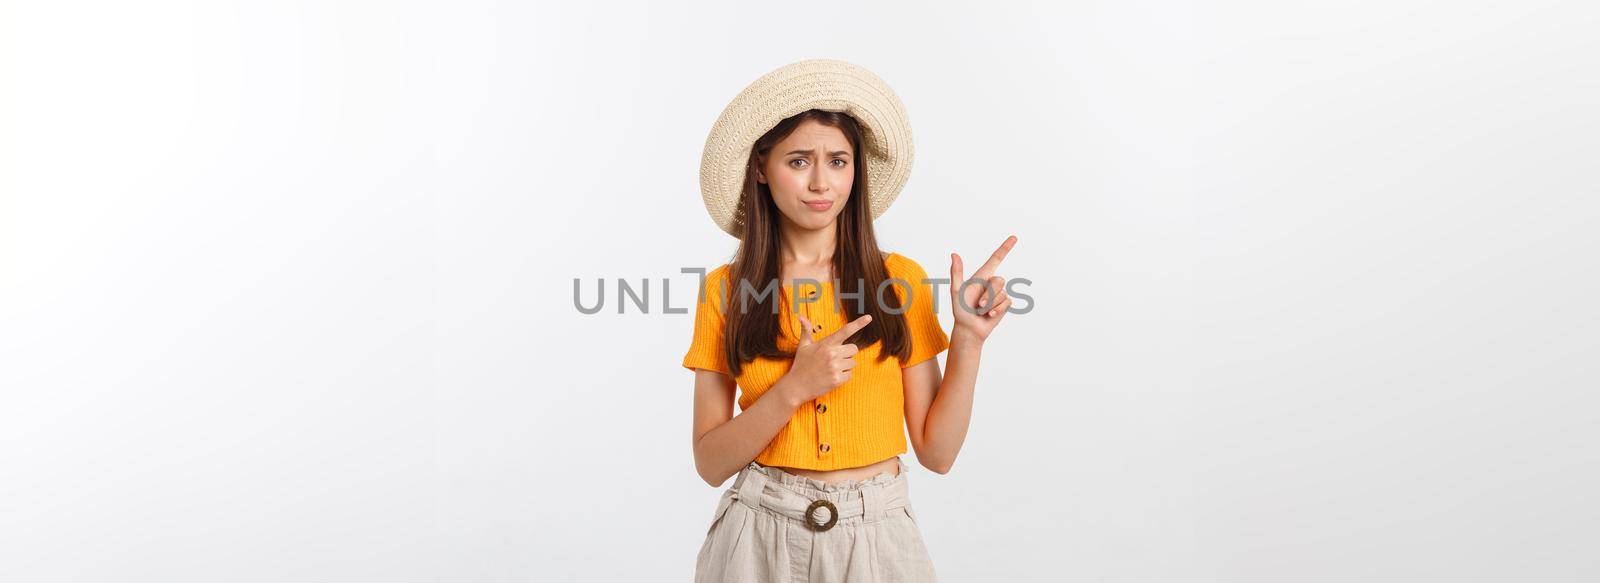 young pretty woman looking unhappy and stressed, suicide gesture making gun sign with hand, pointing to copy space